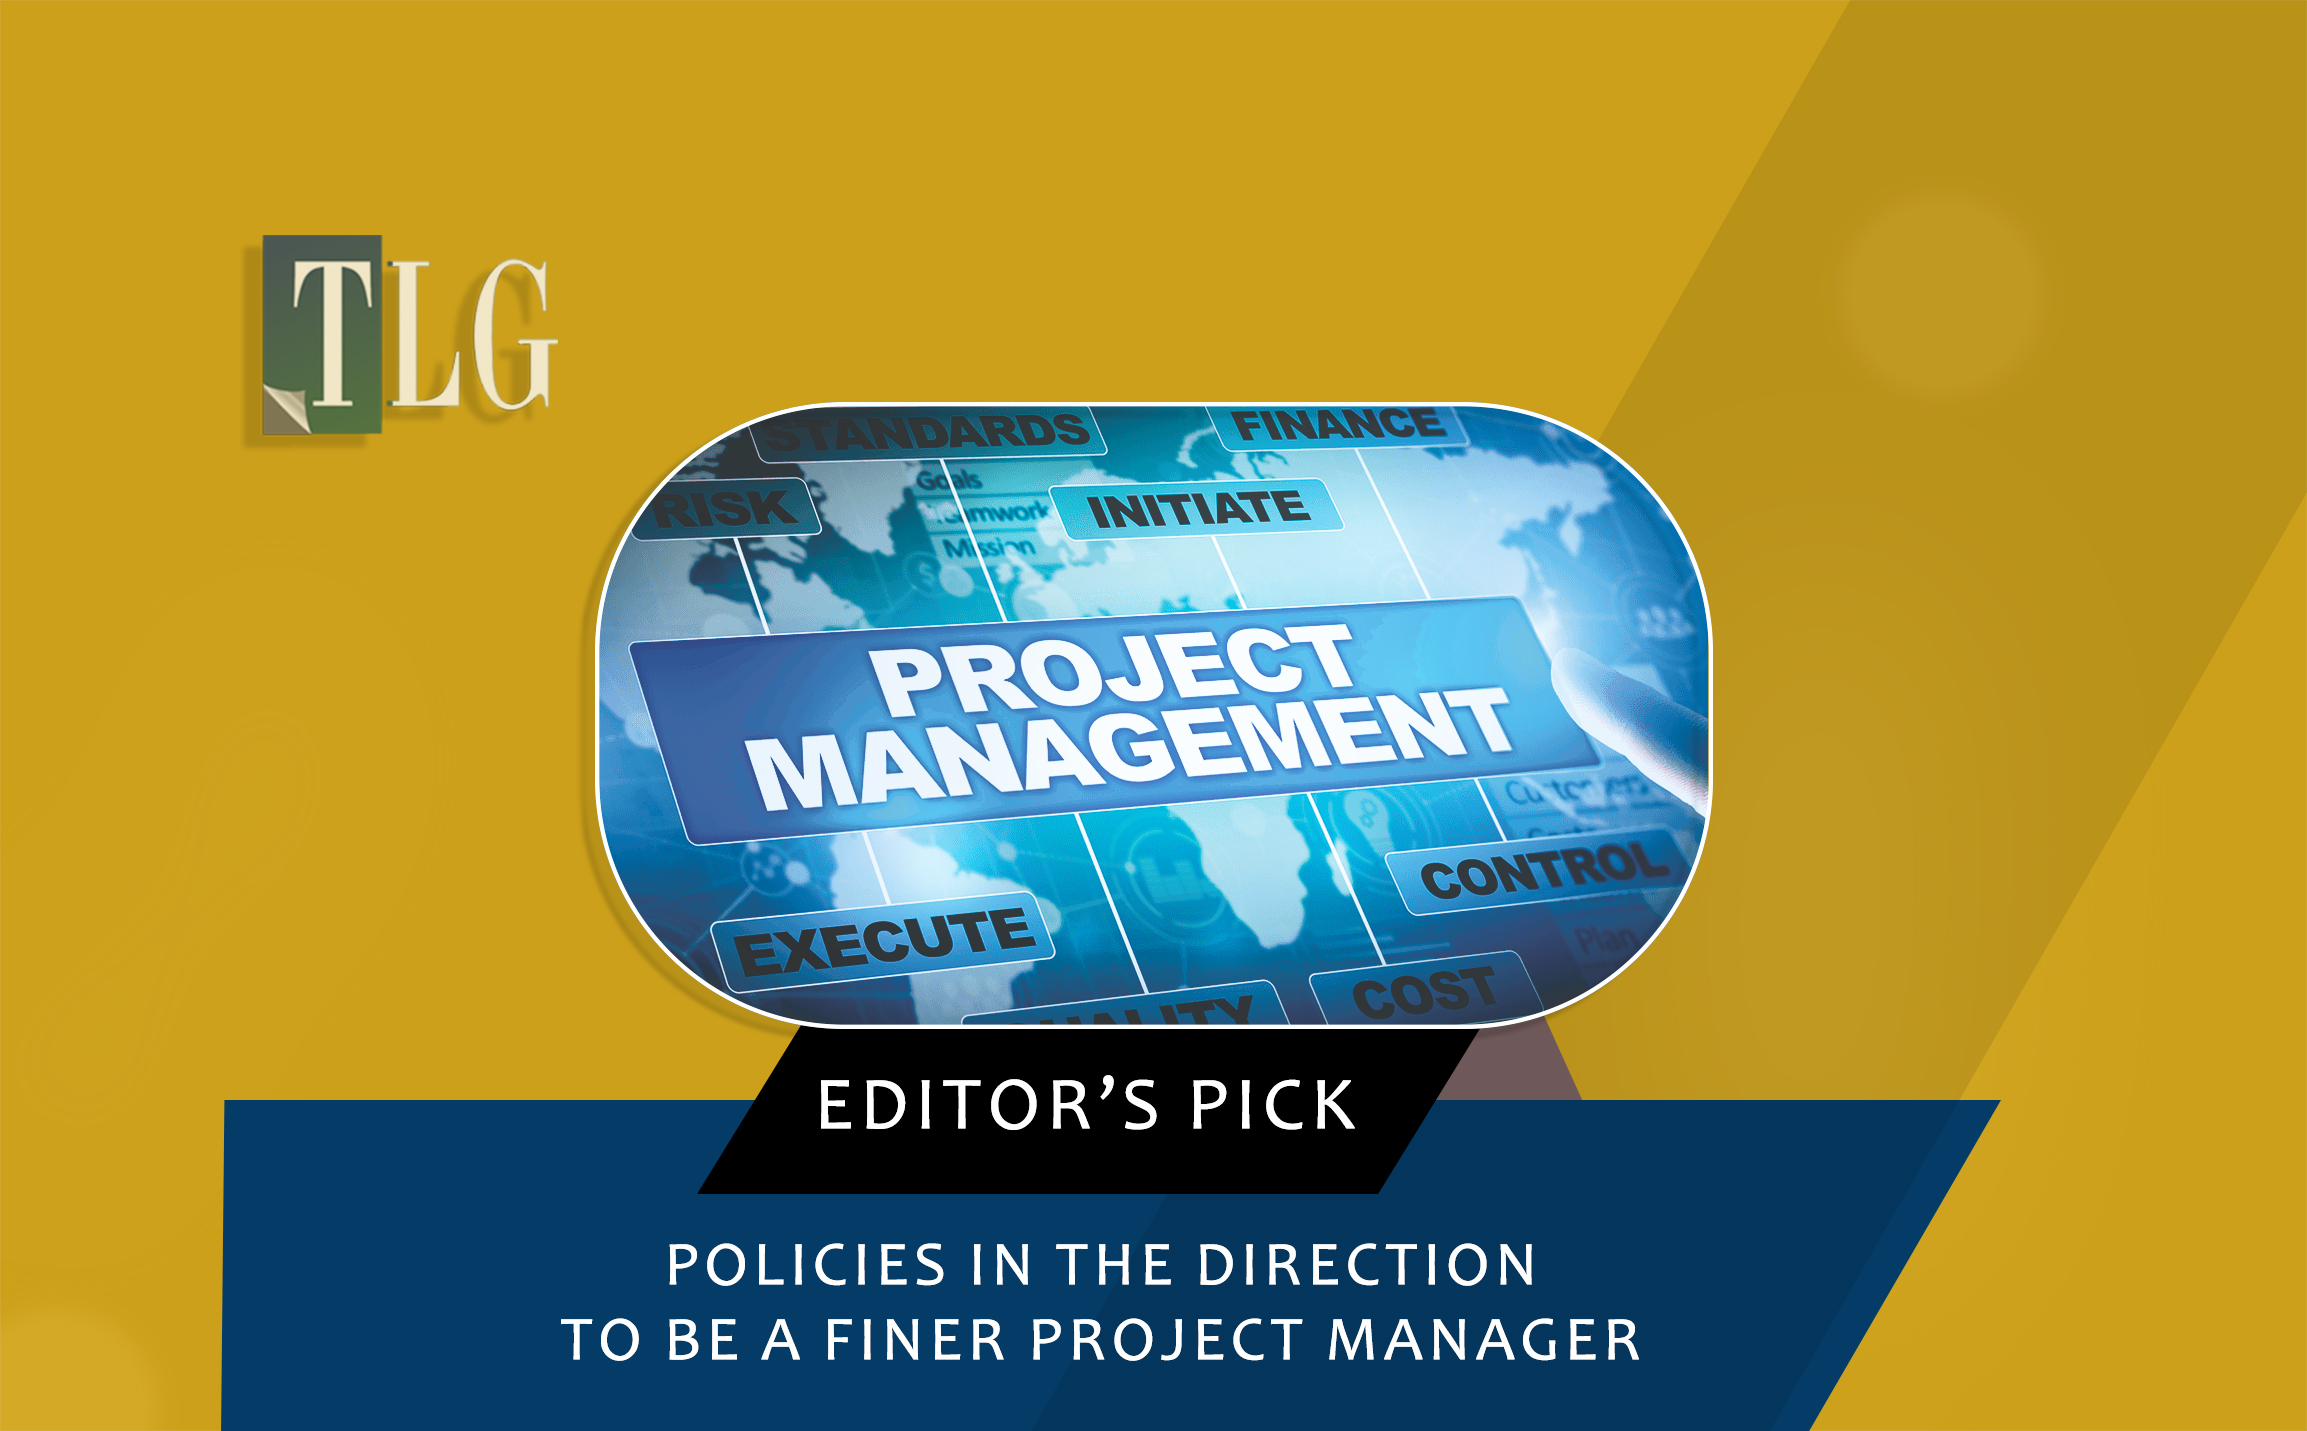 Policies in the Direction to be a Finer Project Manager